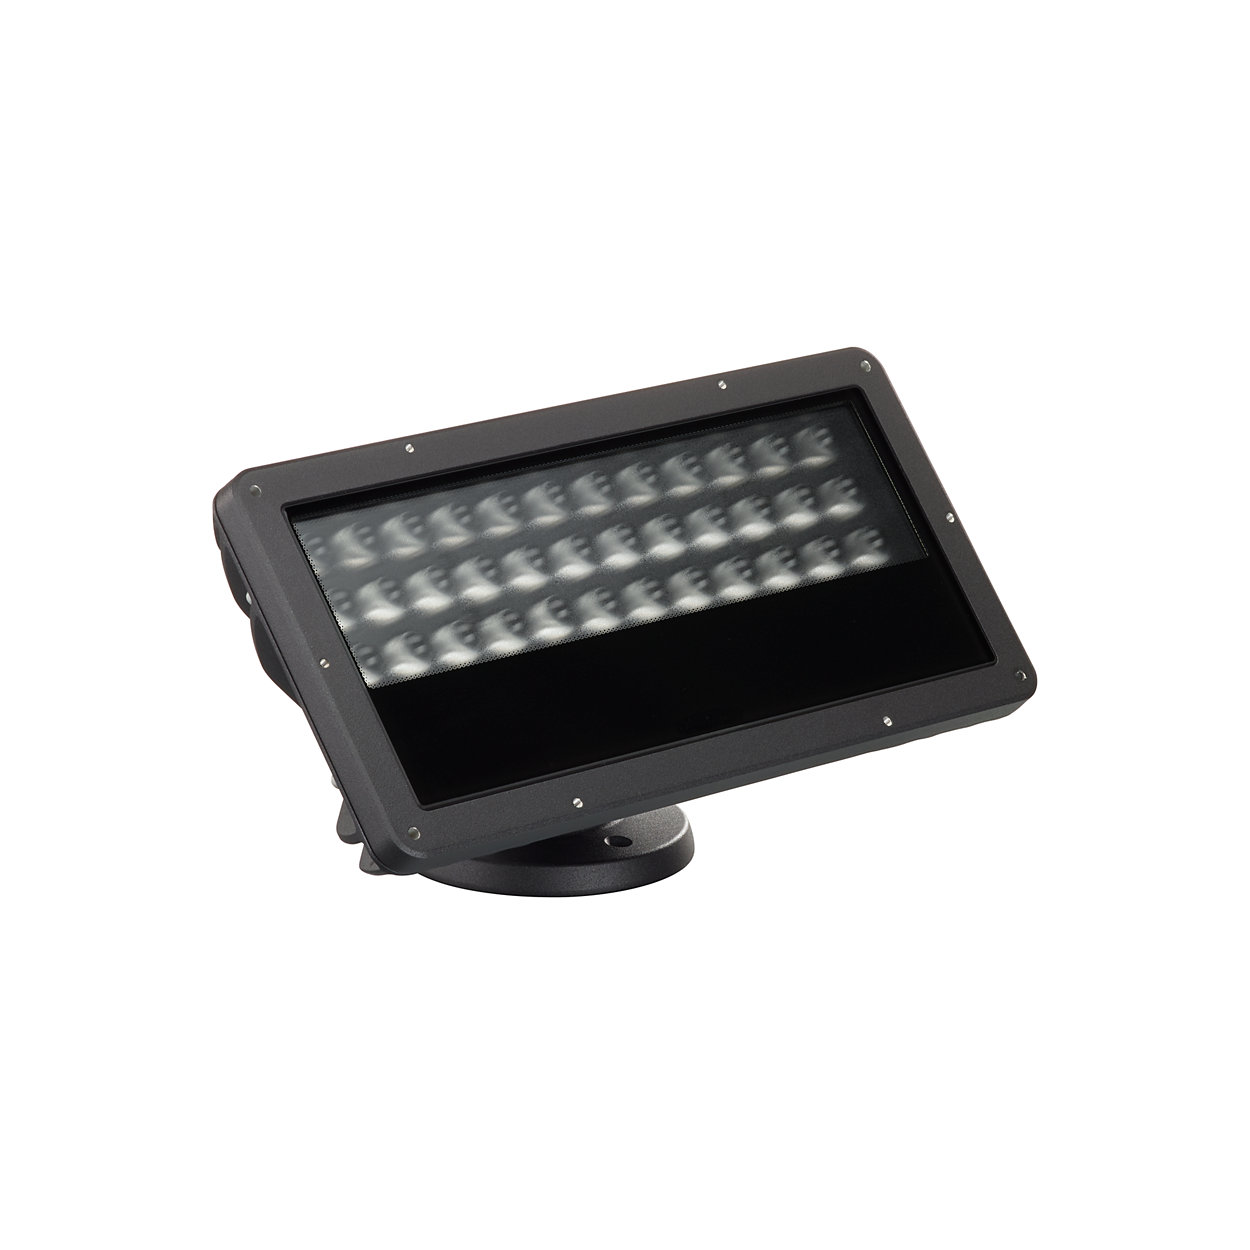 eW Blast Powercore gen4 - Customizable exterior LED wash fixture with solid white light